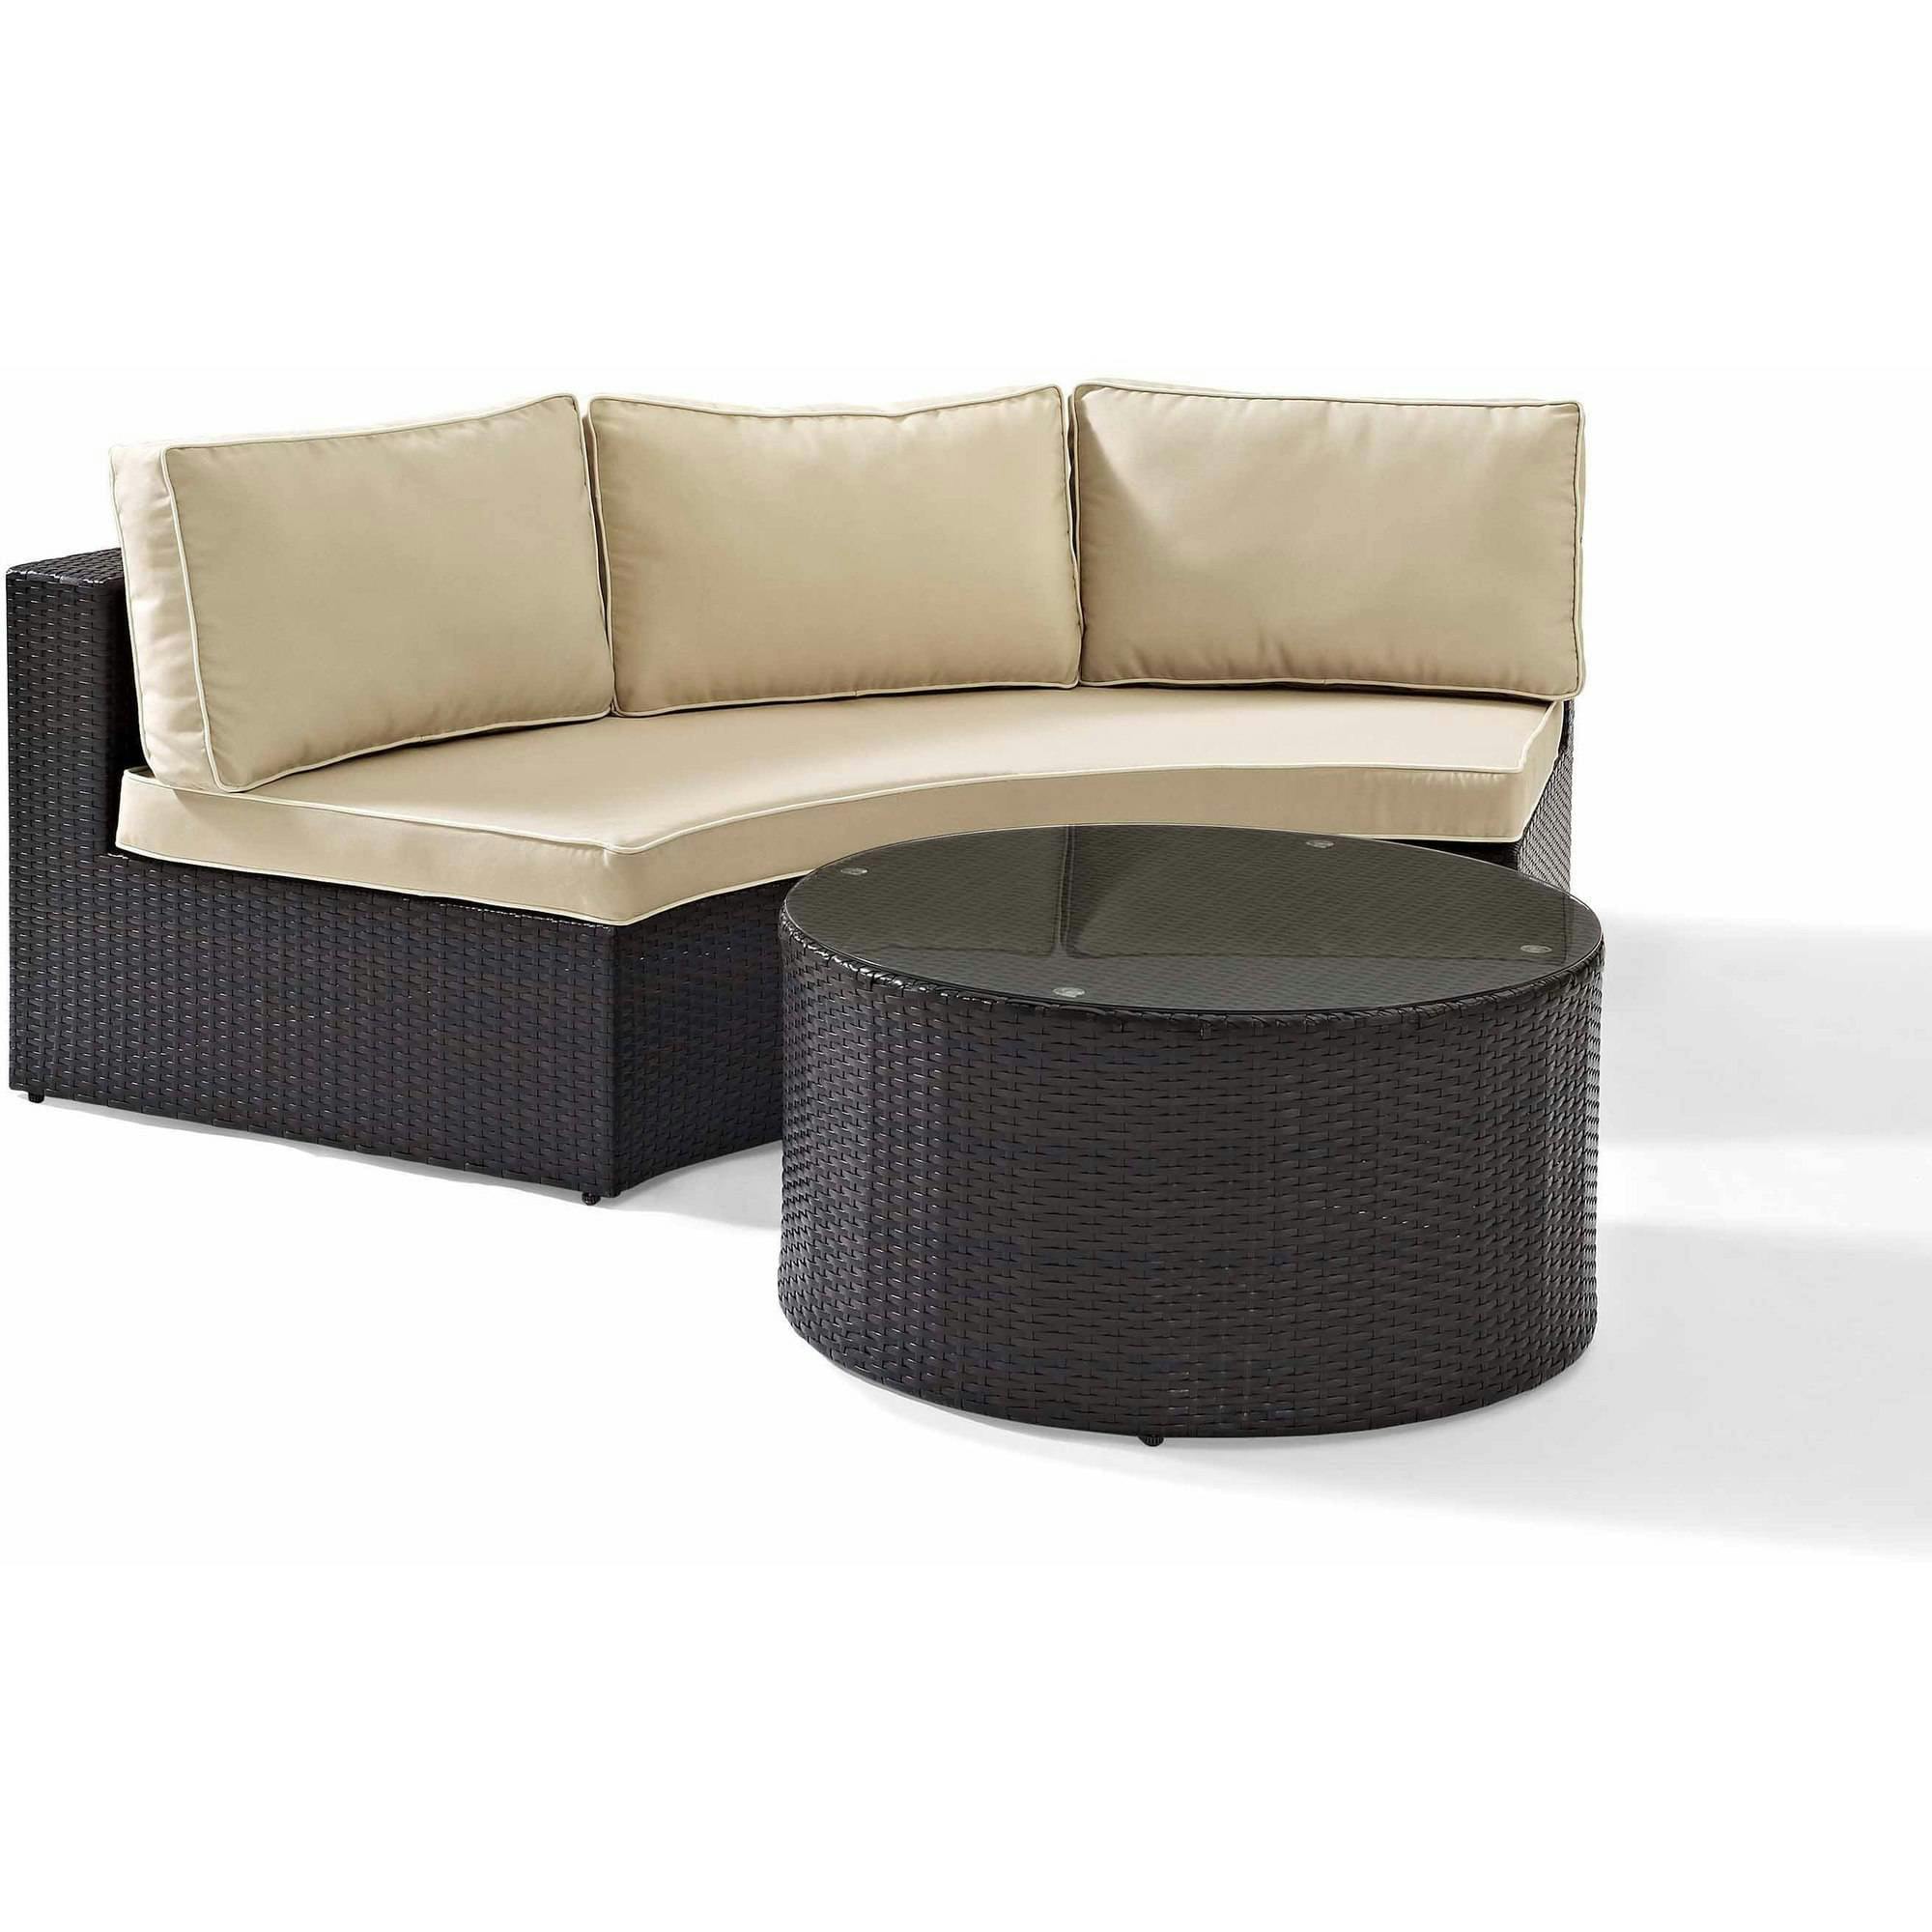 Catalina Classic Cream Outdoor Wicker 3-Person Sectional Sofa Set